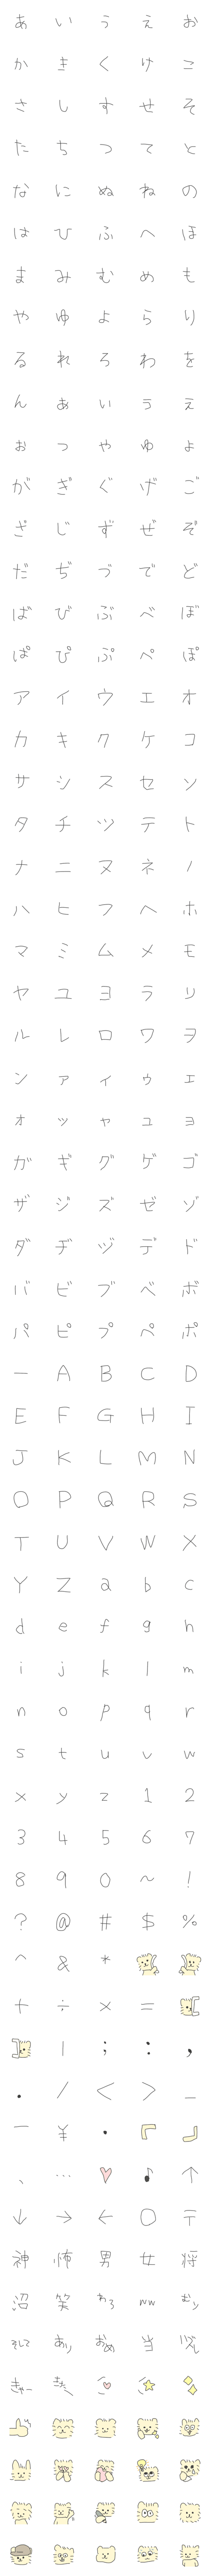 [LINE絵文字]ろき文字(ひだりて)の画像一覧